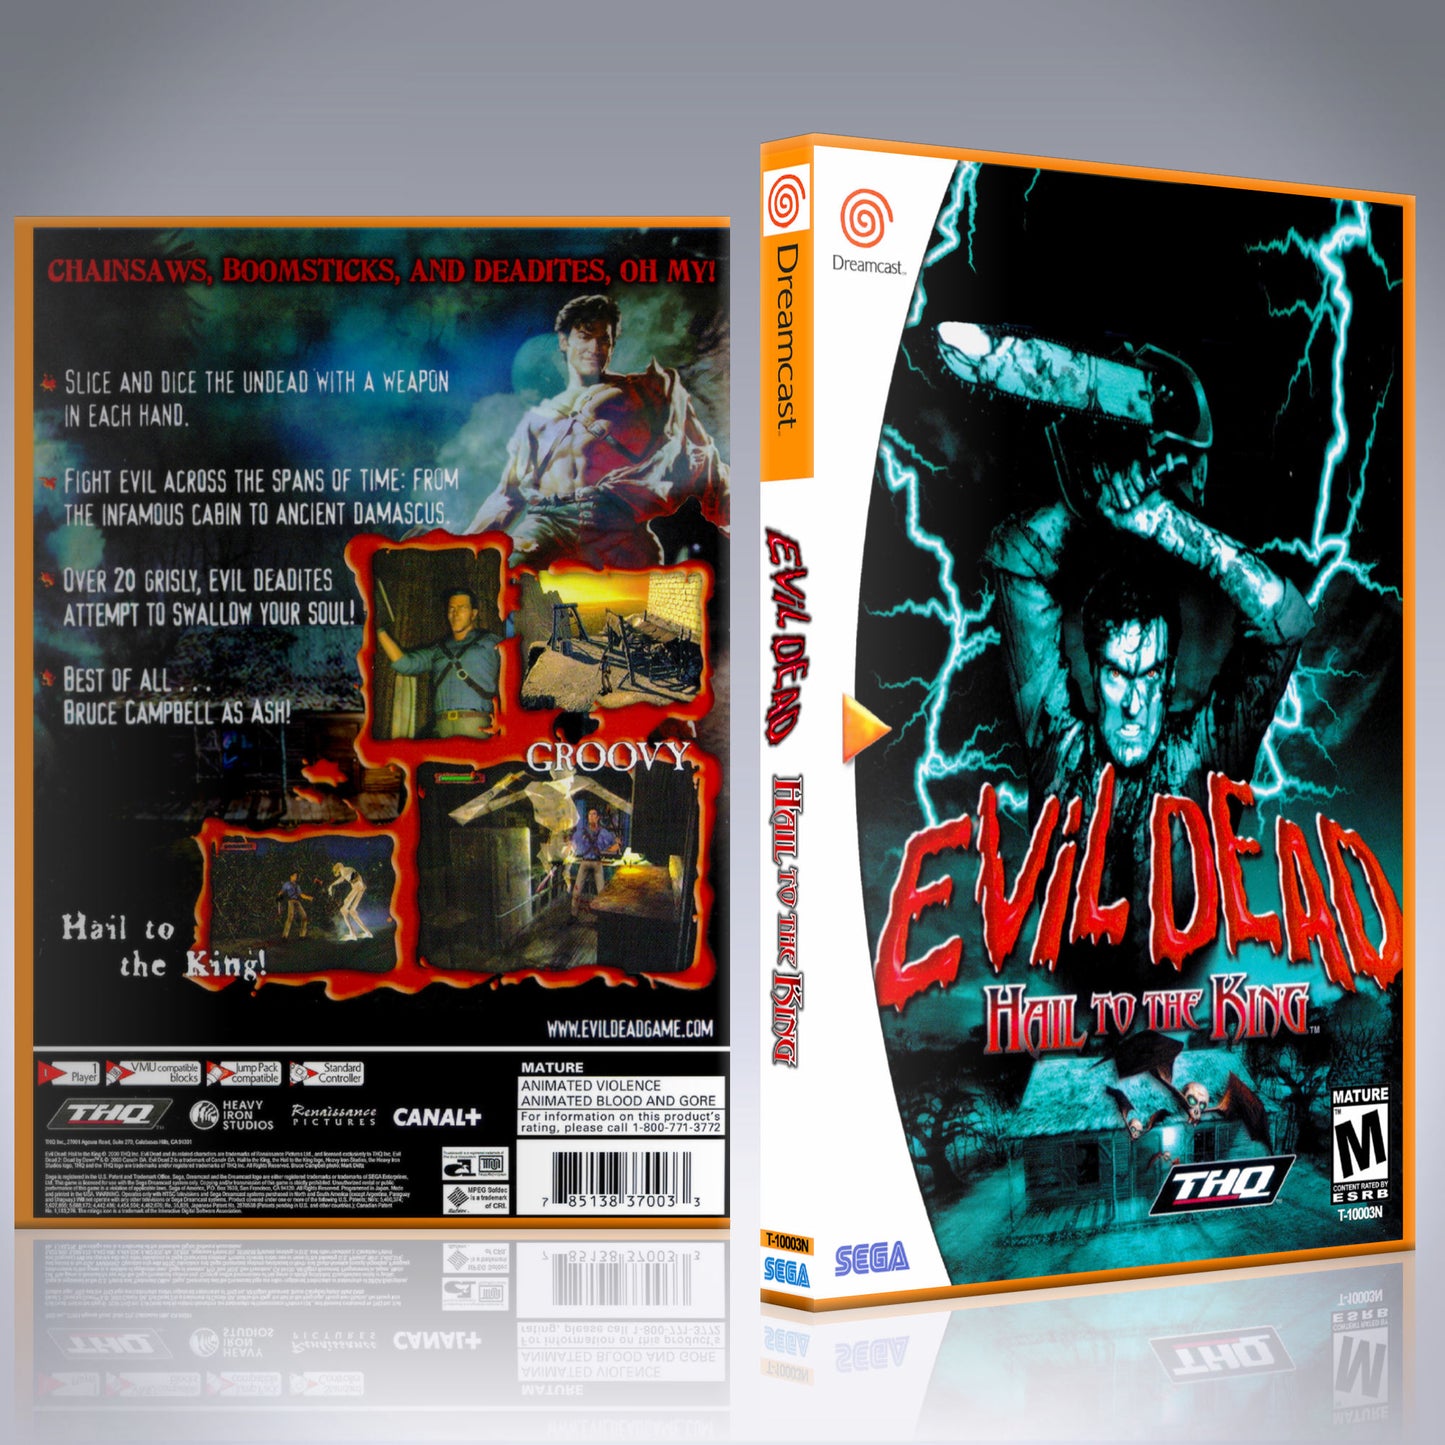 Dreamcast Custom Case - NO GAME - Evil Dead - Hail to the King